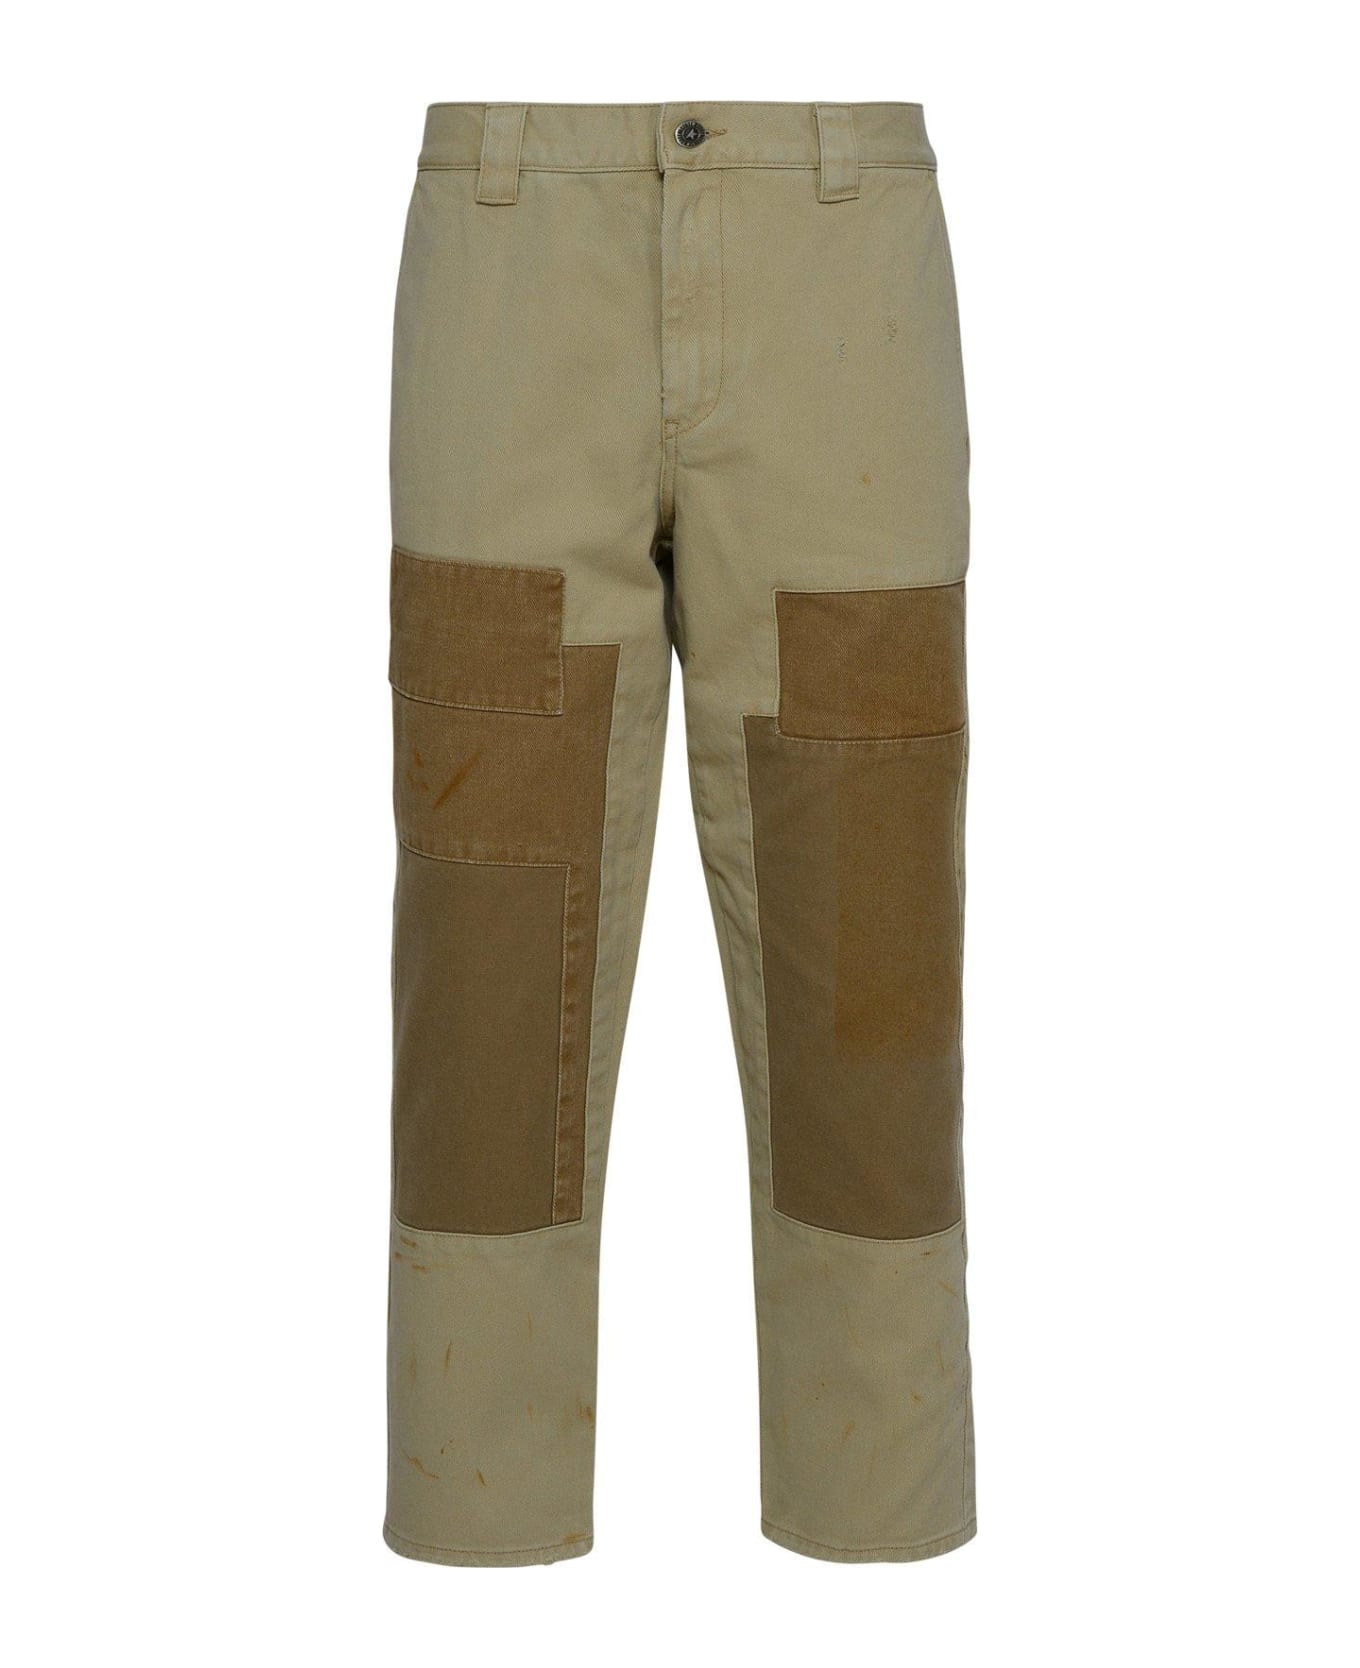 Golden Goose Panlled Trousers - Yellow Cream